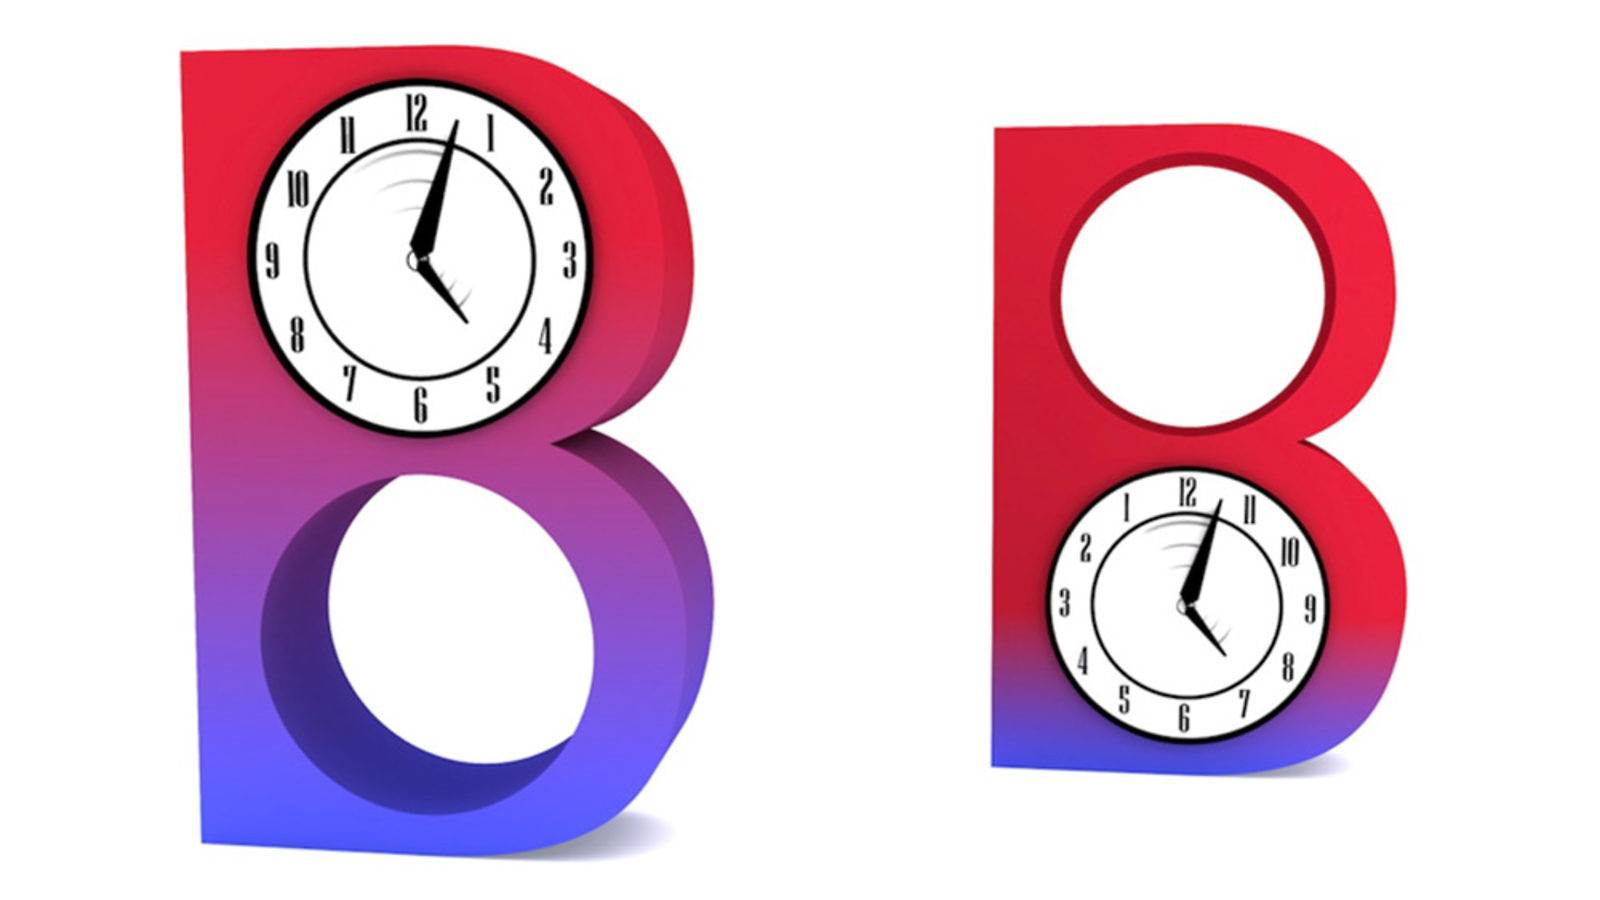 Illustration of "BB" red and blue gradient with clocks inside letterforms 